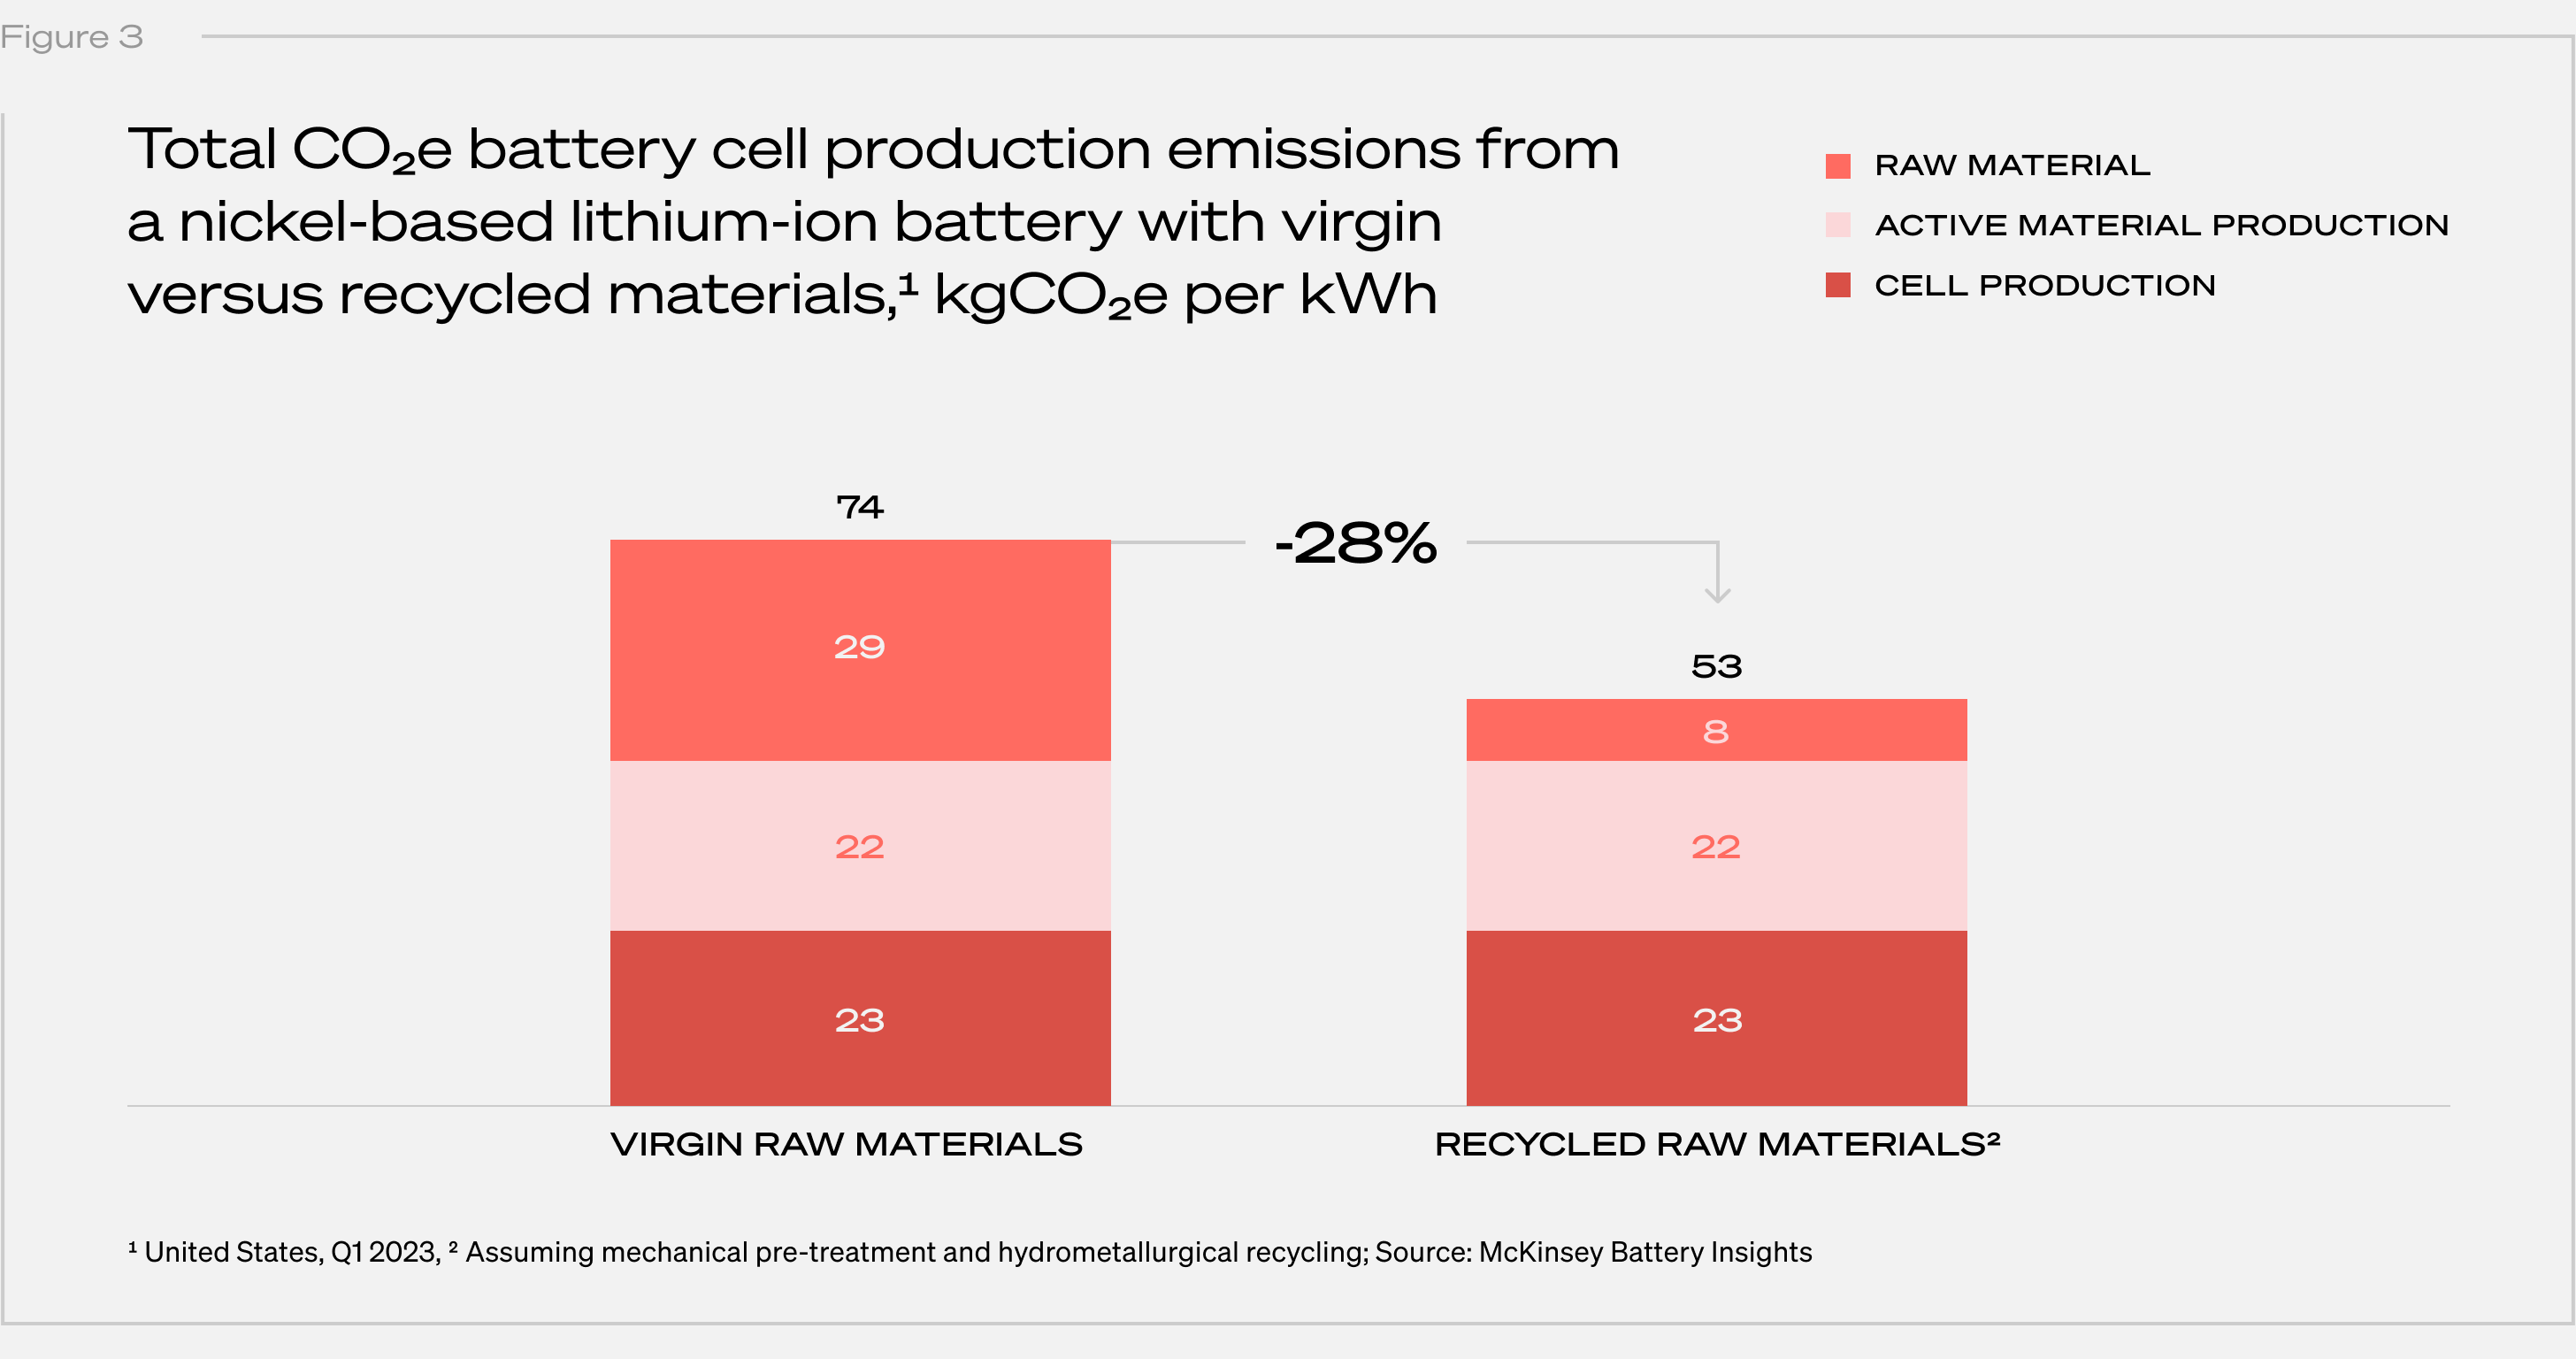 Chart showing recycled batteries using recycled materials released 28% less emissions